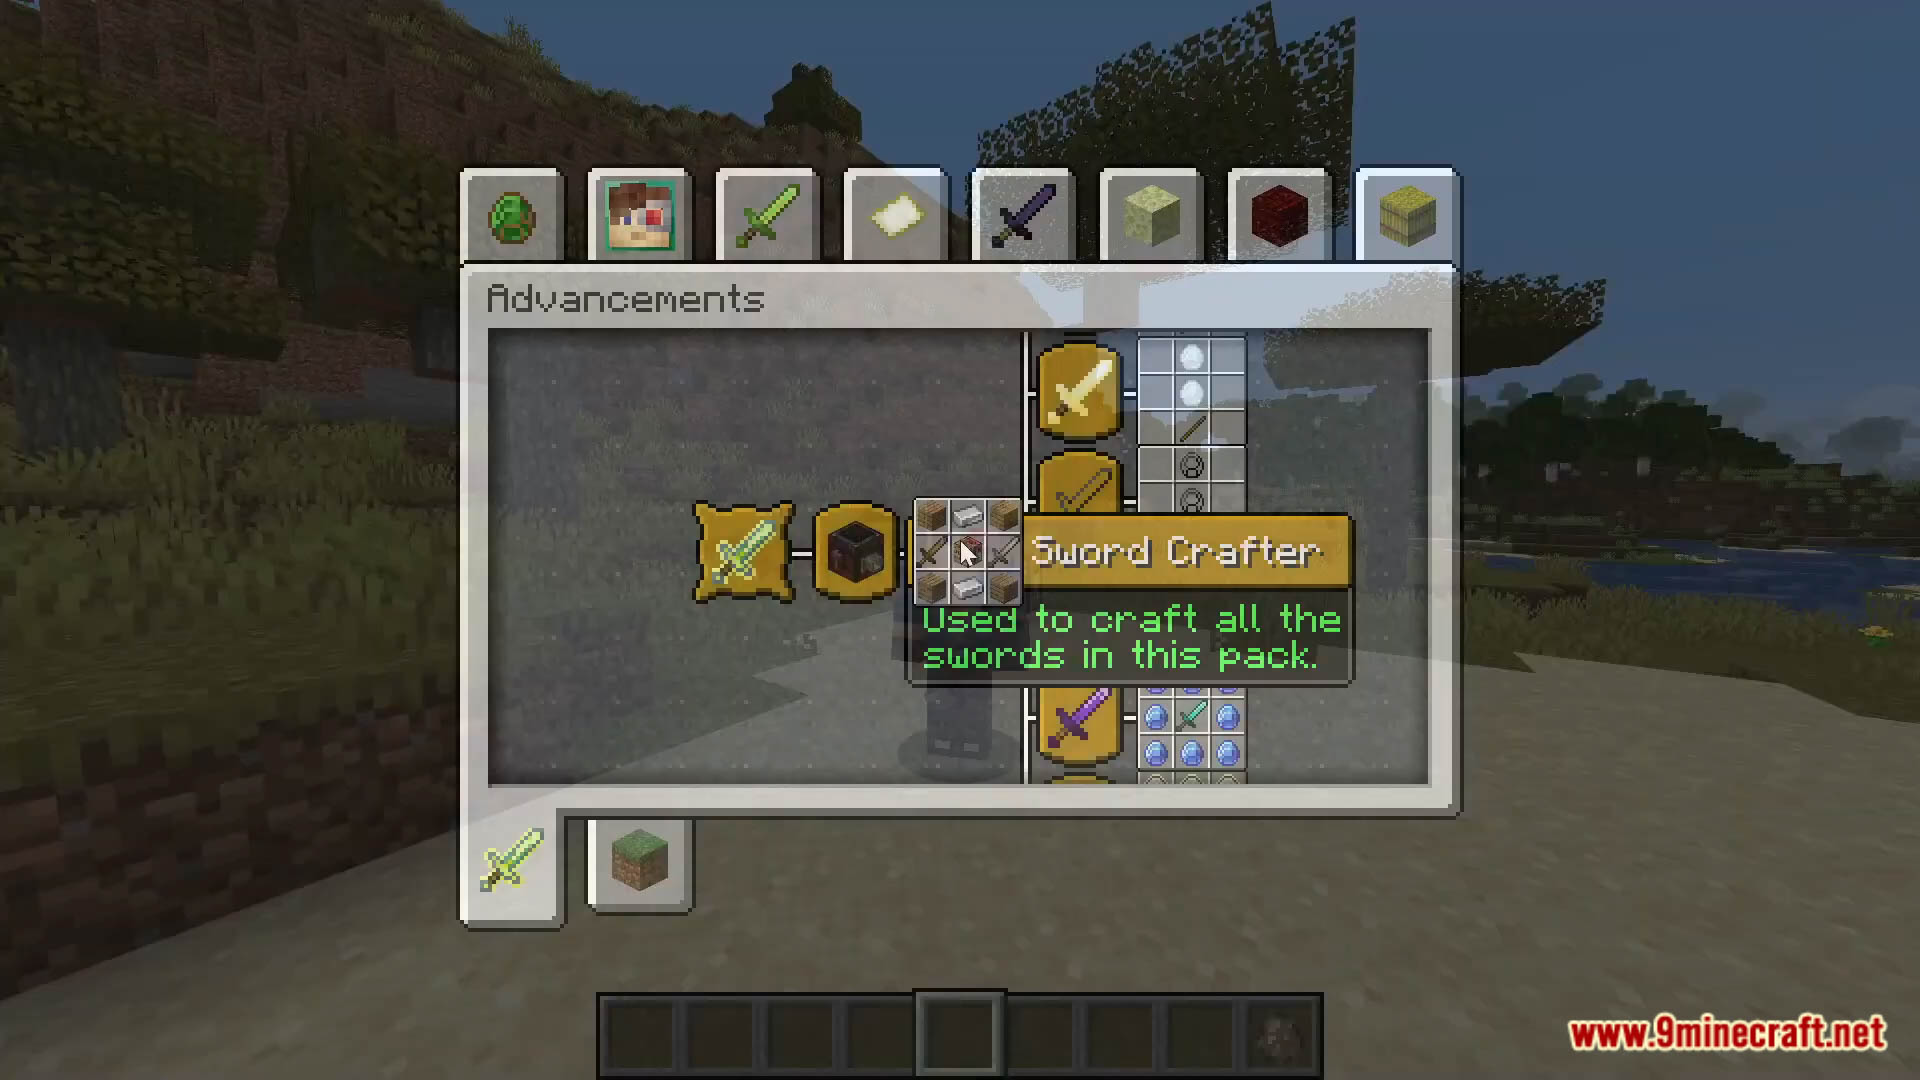 How can I craft a sword in Mine Blocks game? - Arqade